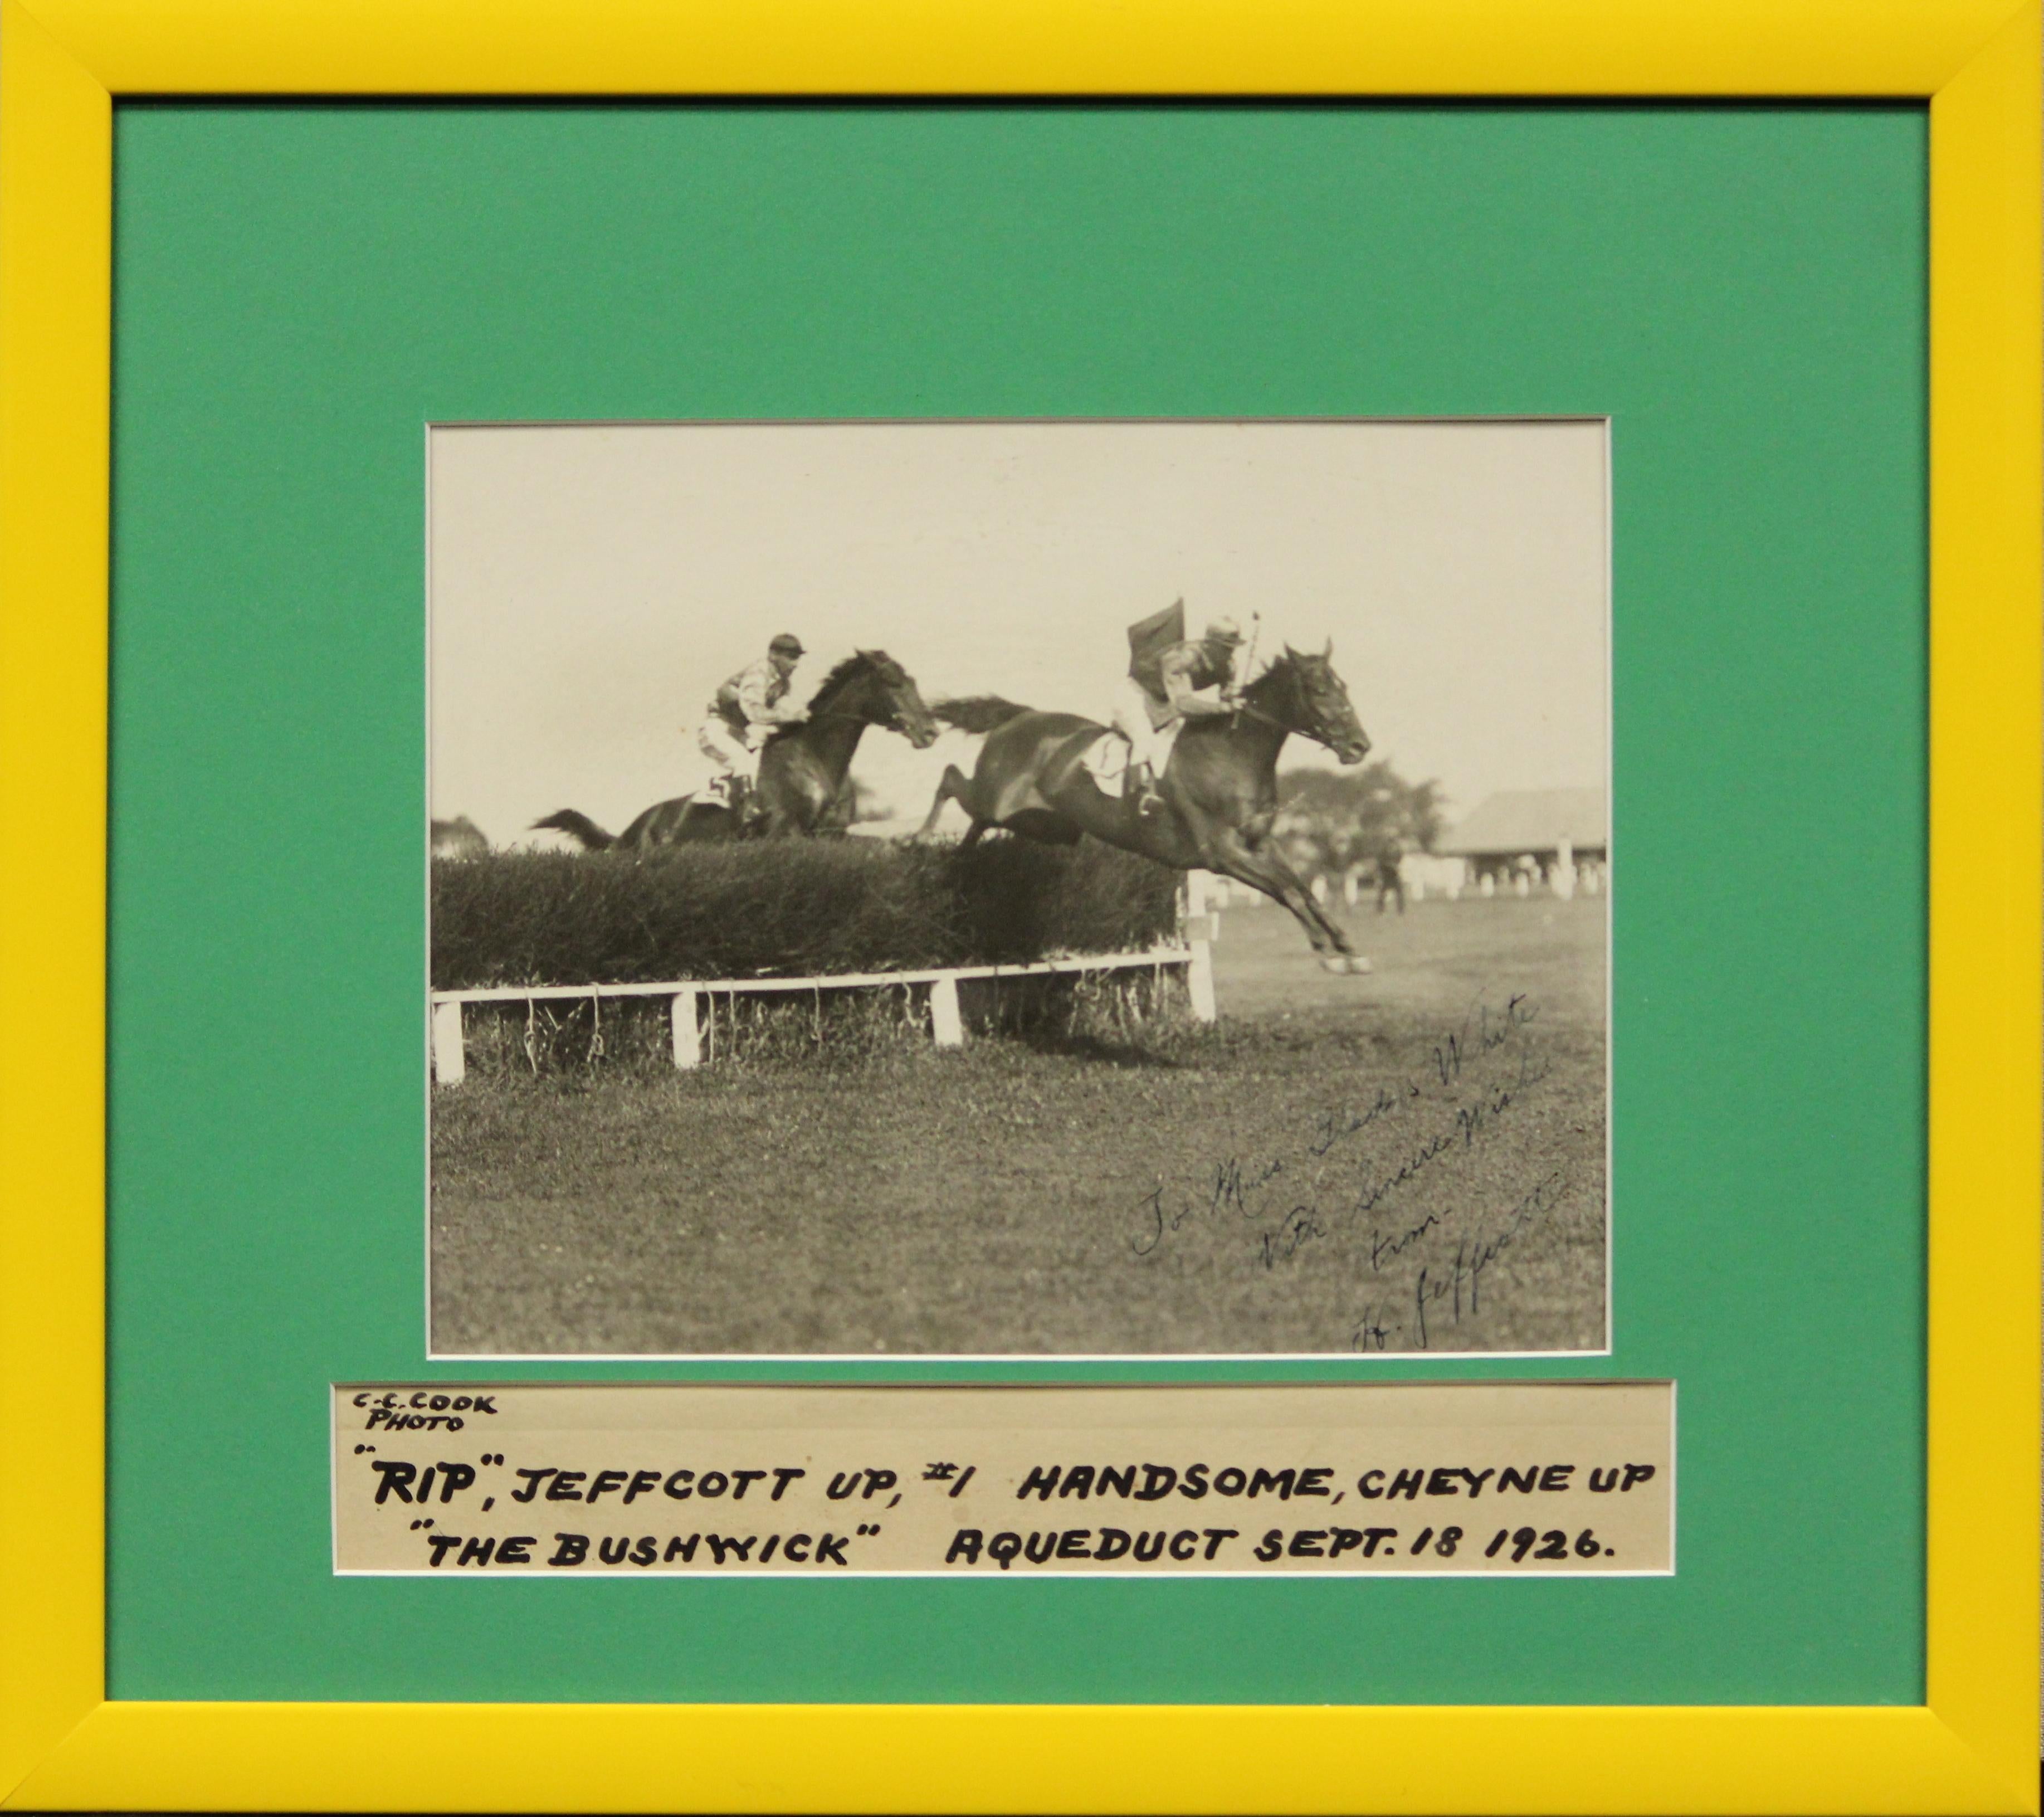 "The Bushwick" Steeplechase at Aqueduct Sept. 18, 1926 - Photograph by C.C. Cook